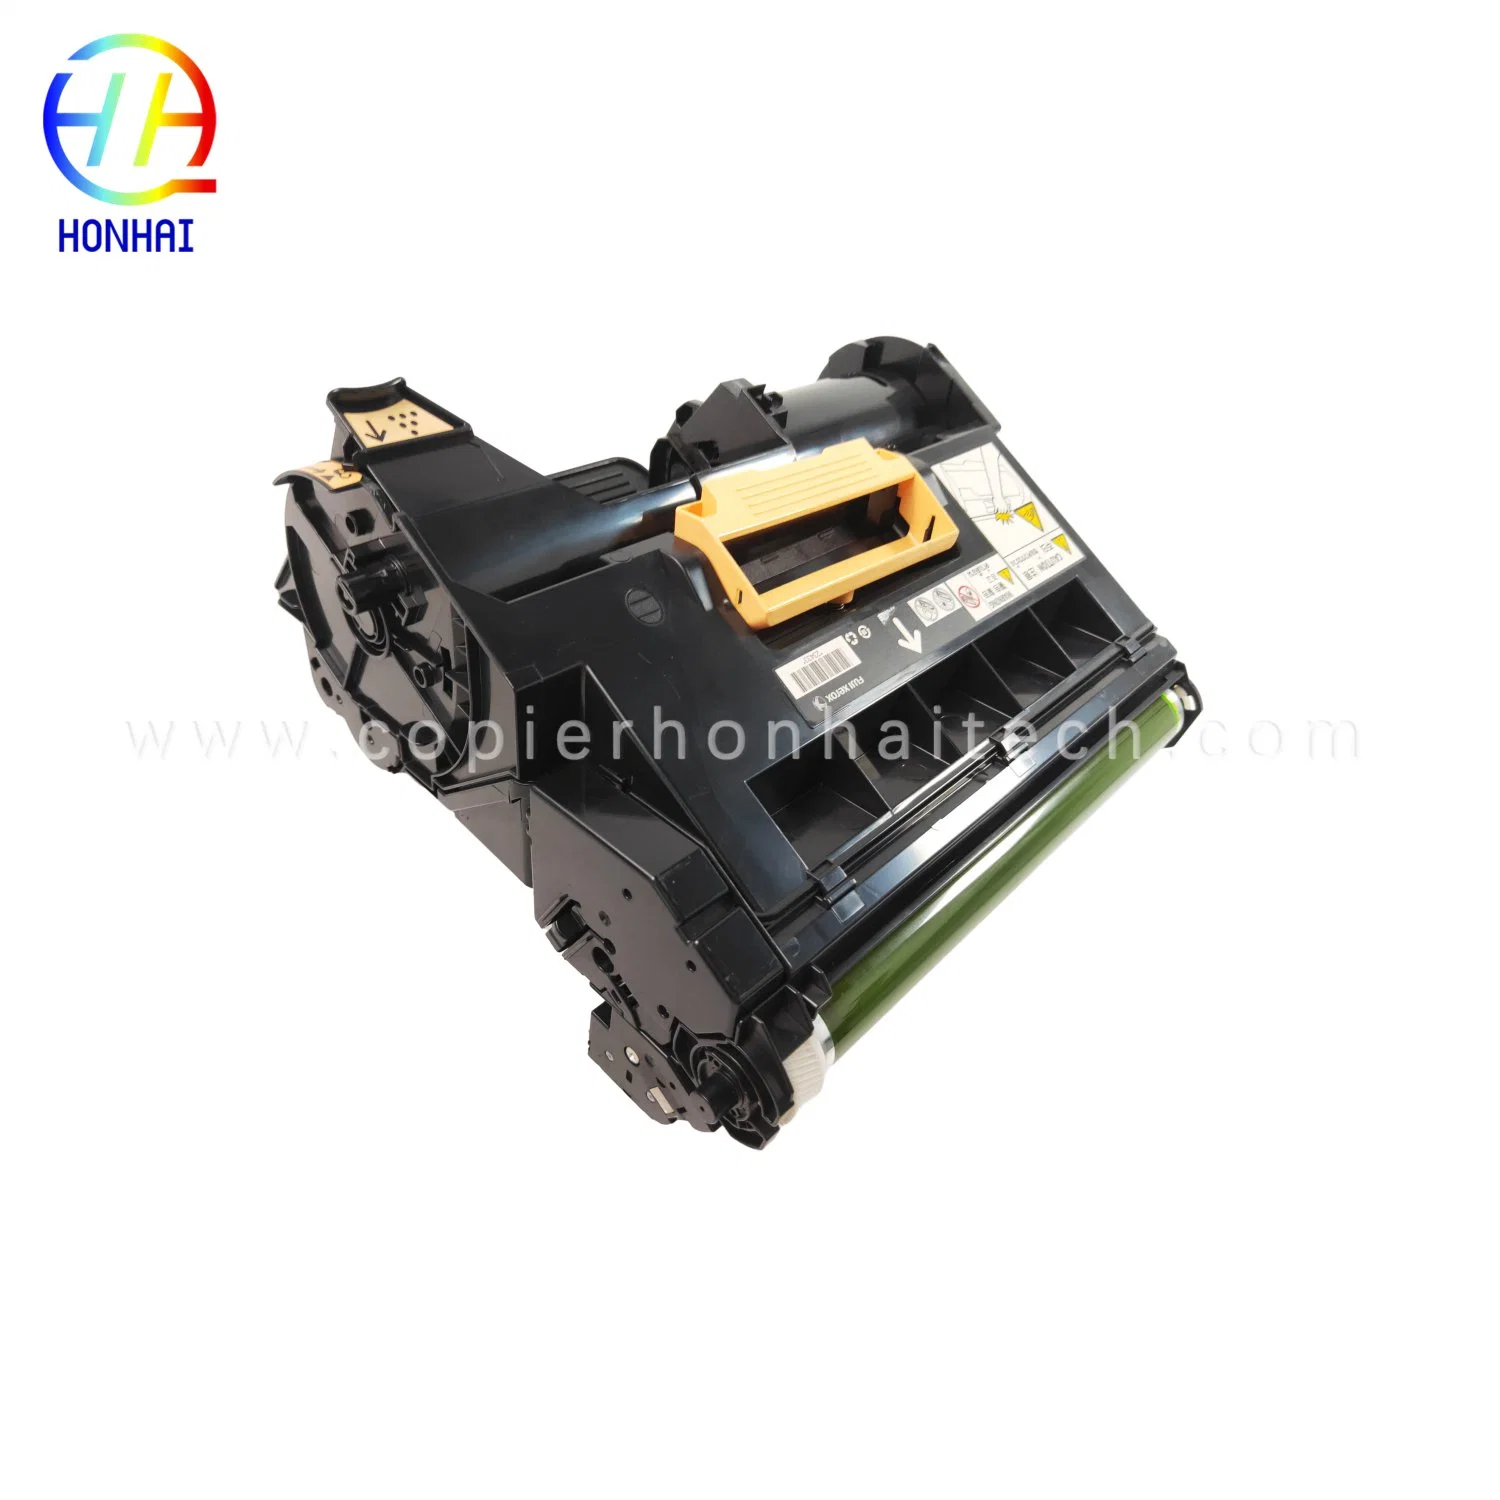 Drum Cartridge for Xerox Phaser 3610 Workcentre 3615 3655 3655I 113r00773 113r773 Drum Unit